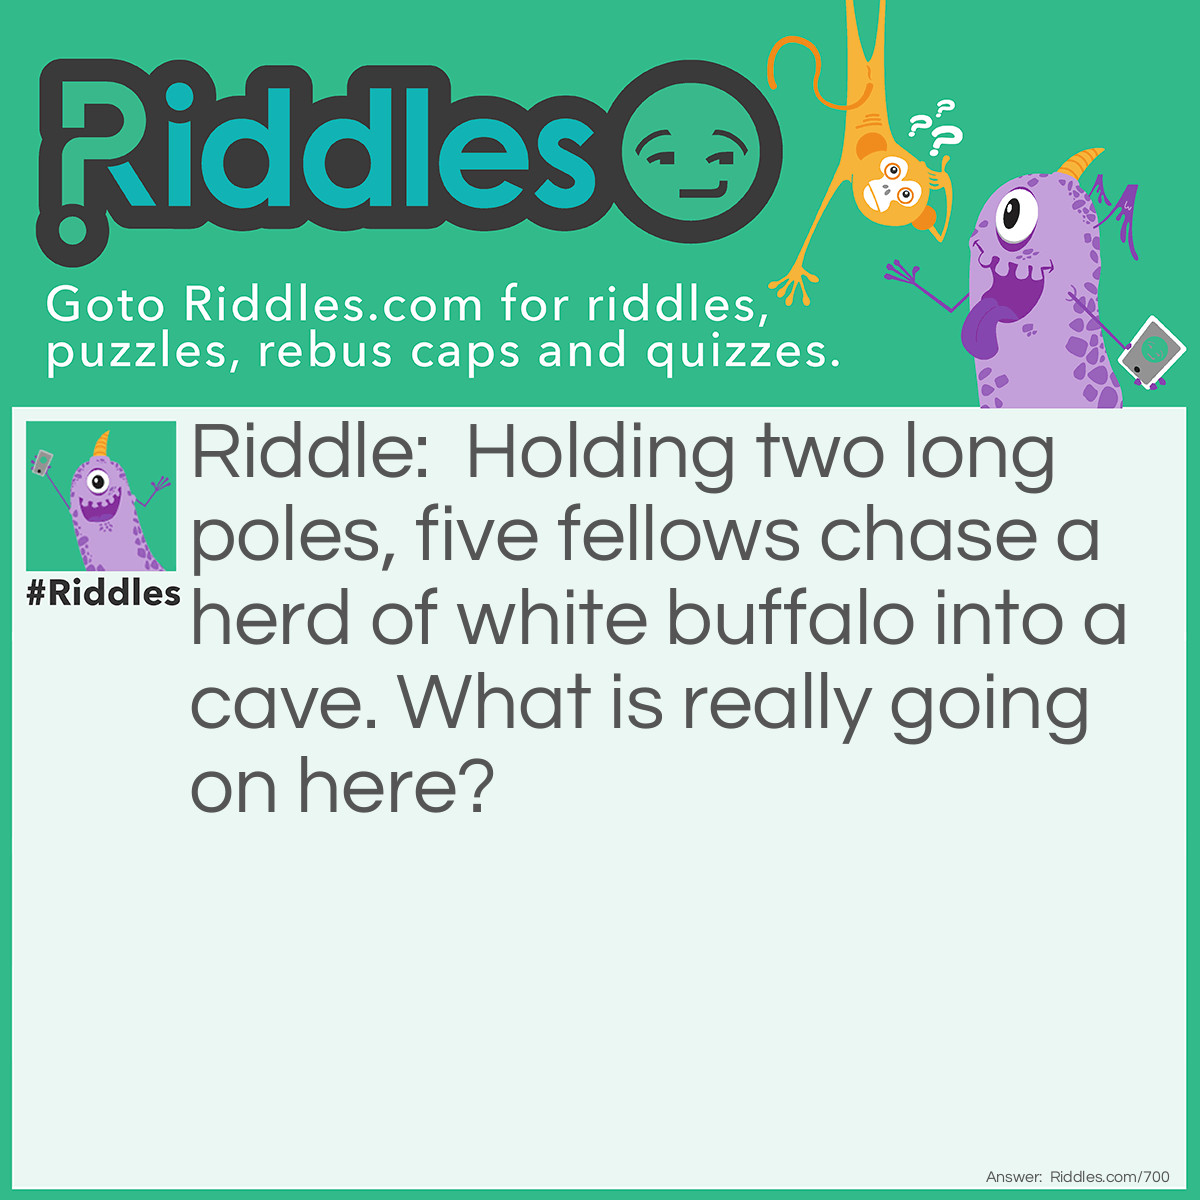 Riddle: Holding two long poles, five fellows chase a herd of white buffalo into a cave. What is really going on here? Answer: They're eating rice with a pair of chopsticks.